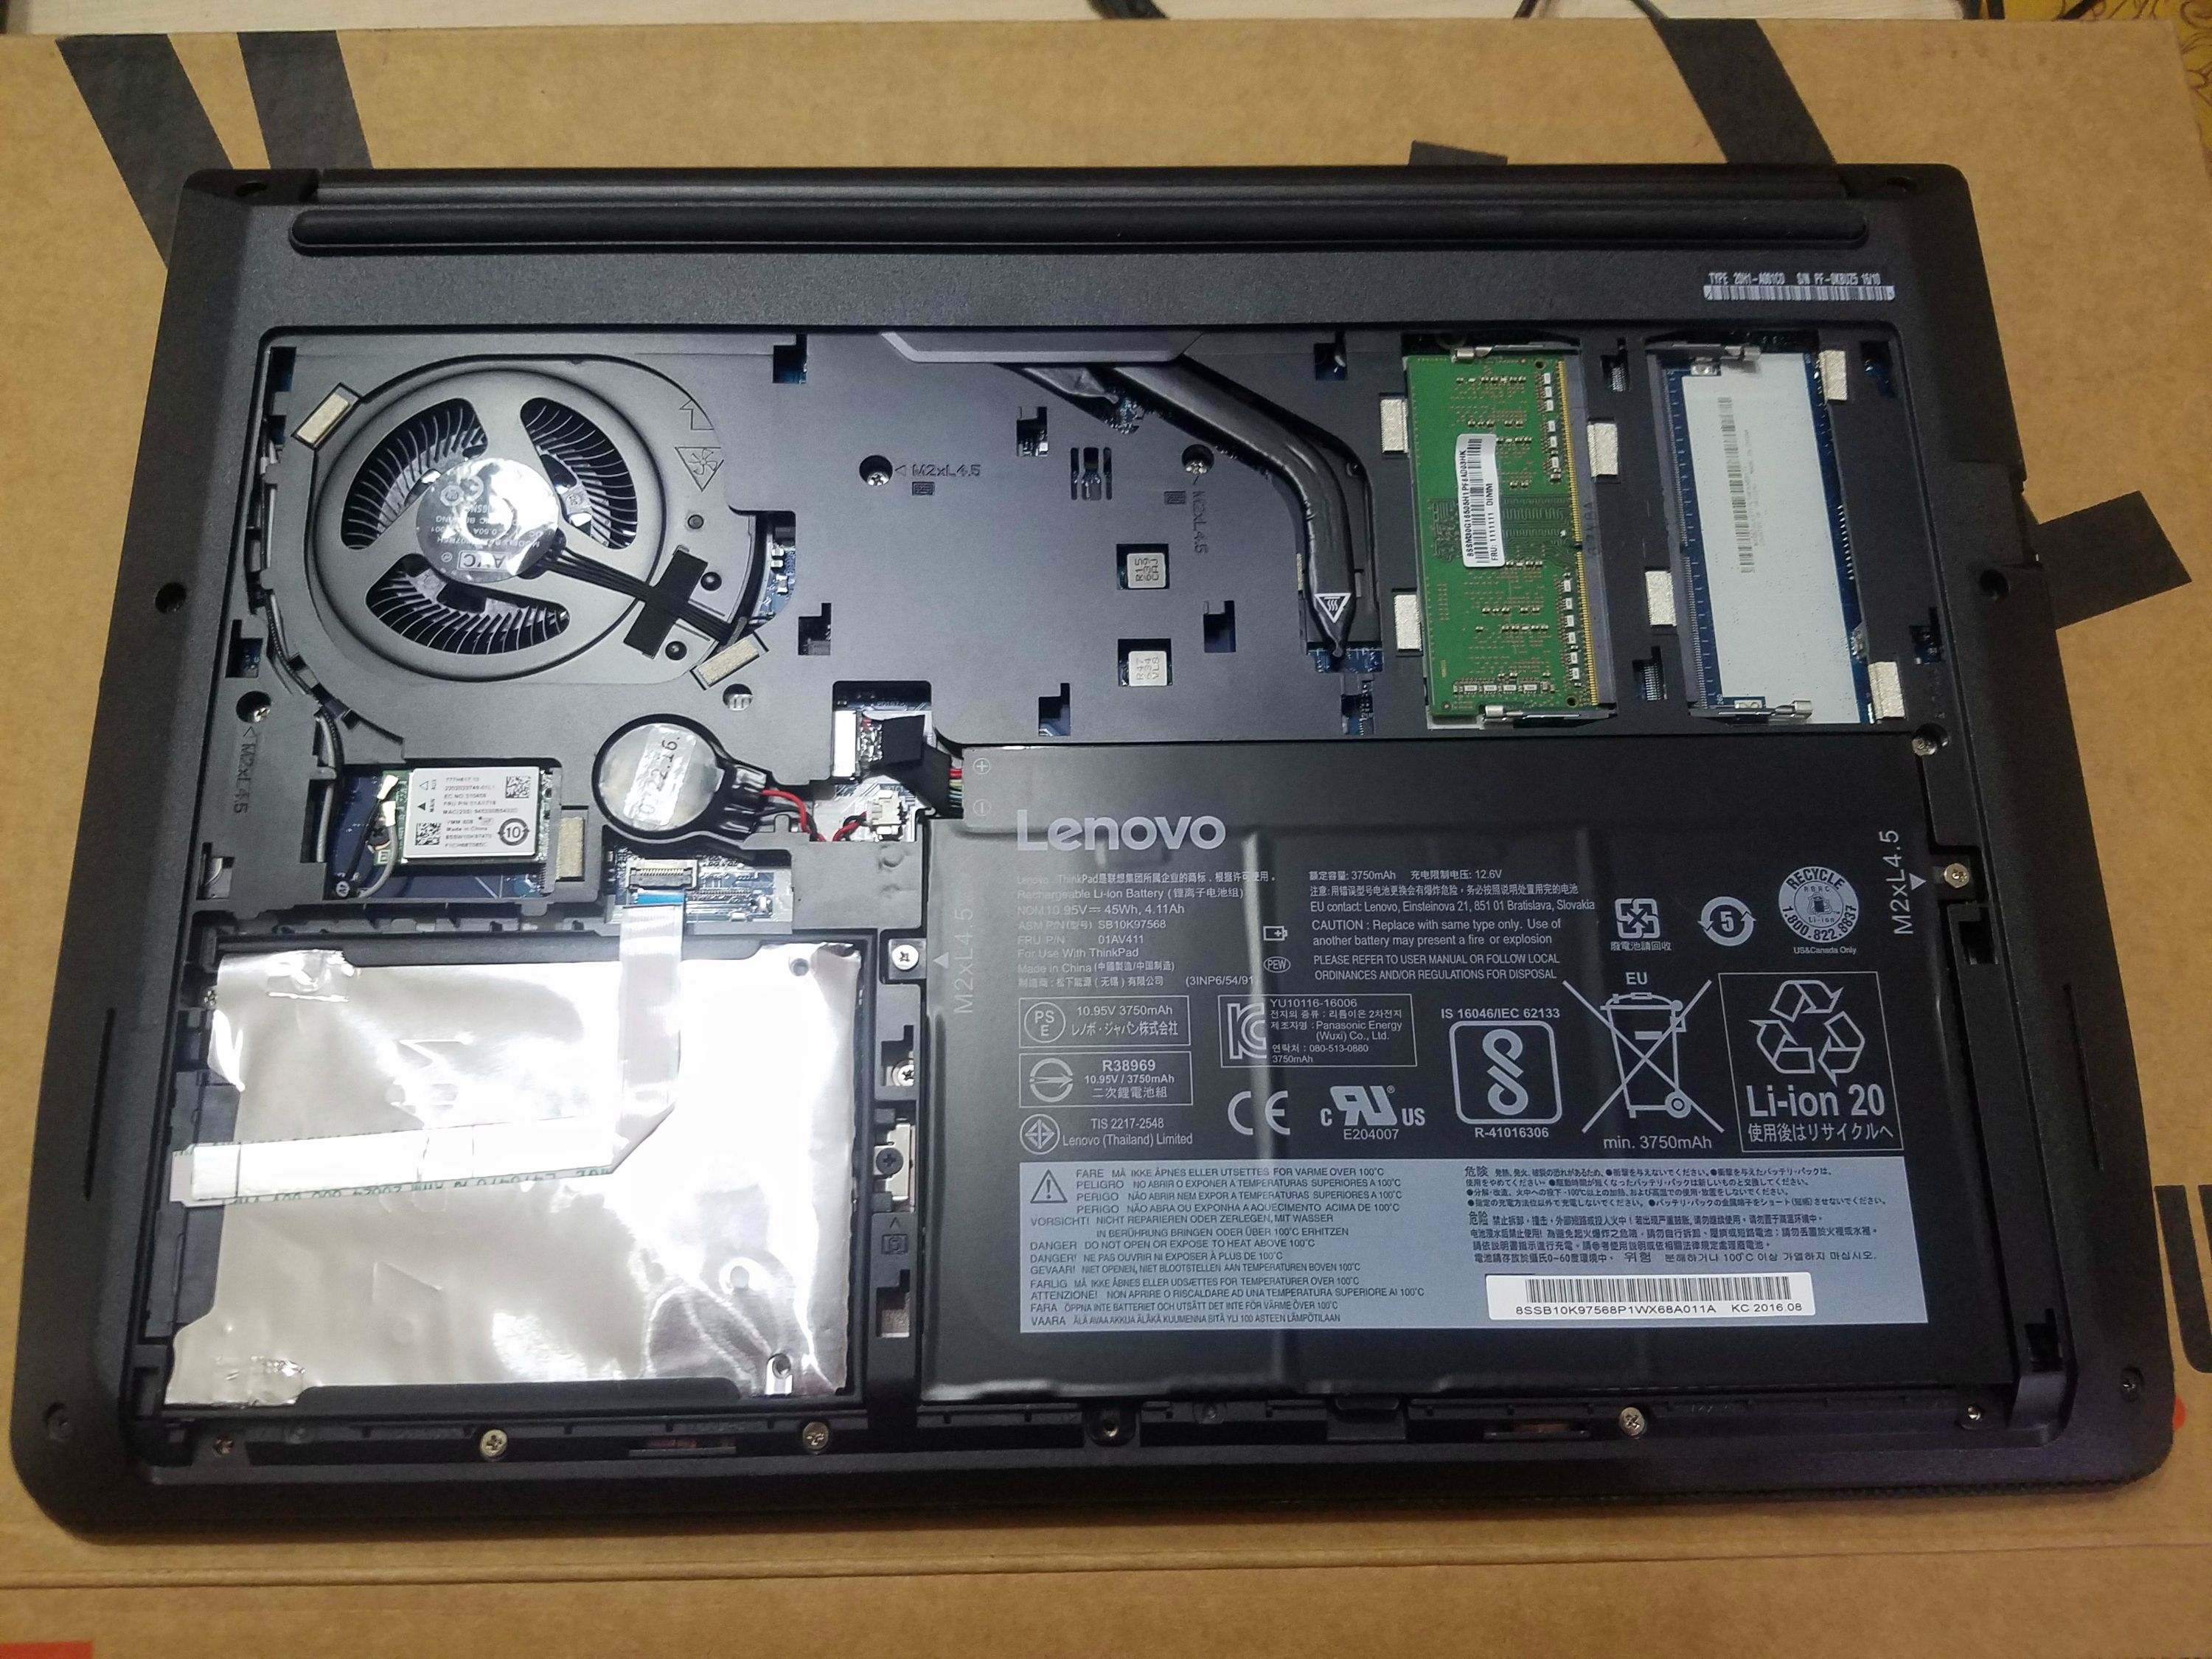 jomfru Understrege maling Lenovo Thinkpad E470 Disassembly and SSD, HDD, RAM upgrade options